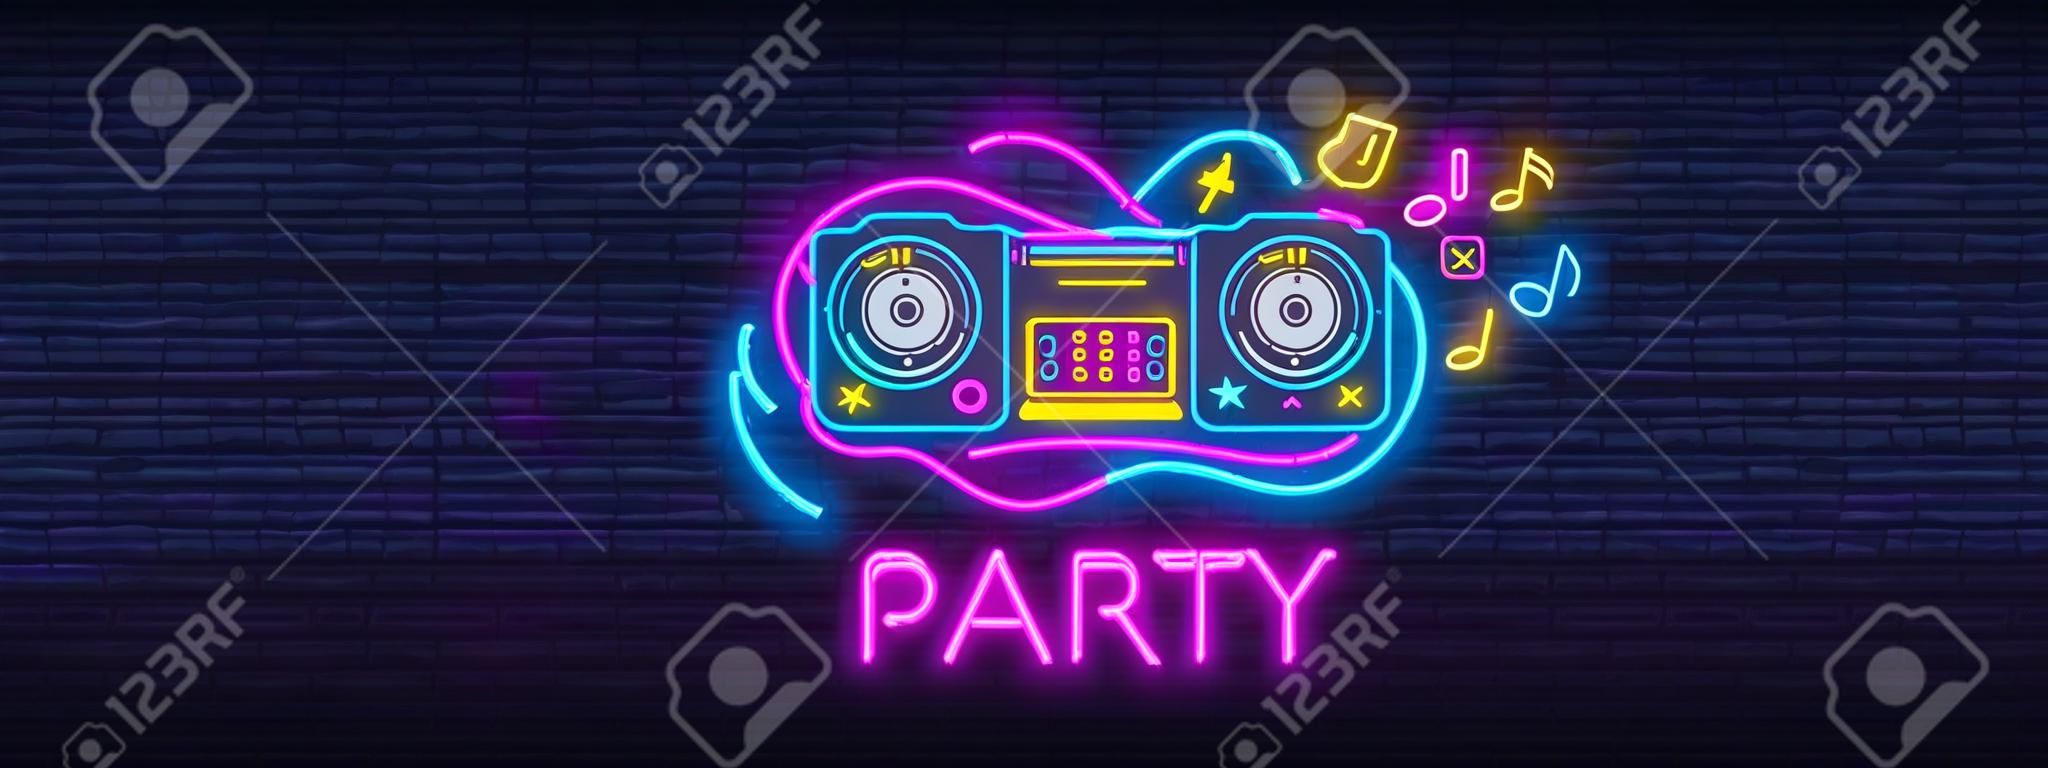 DJ Music Party neon sign collection vector design template. DJ Concept of music, radio and live concert, neon poster, light banner design element colorful, night bright advertising. Vector